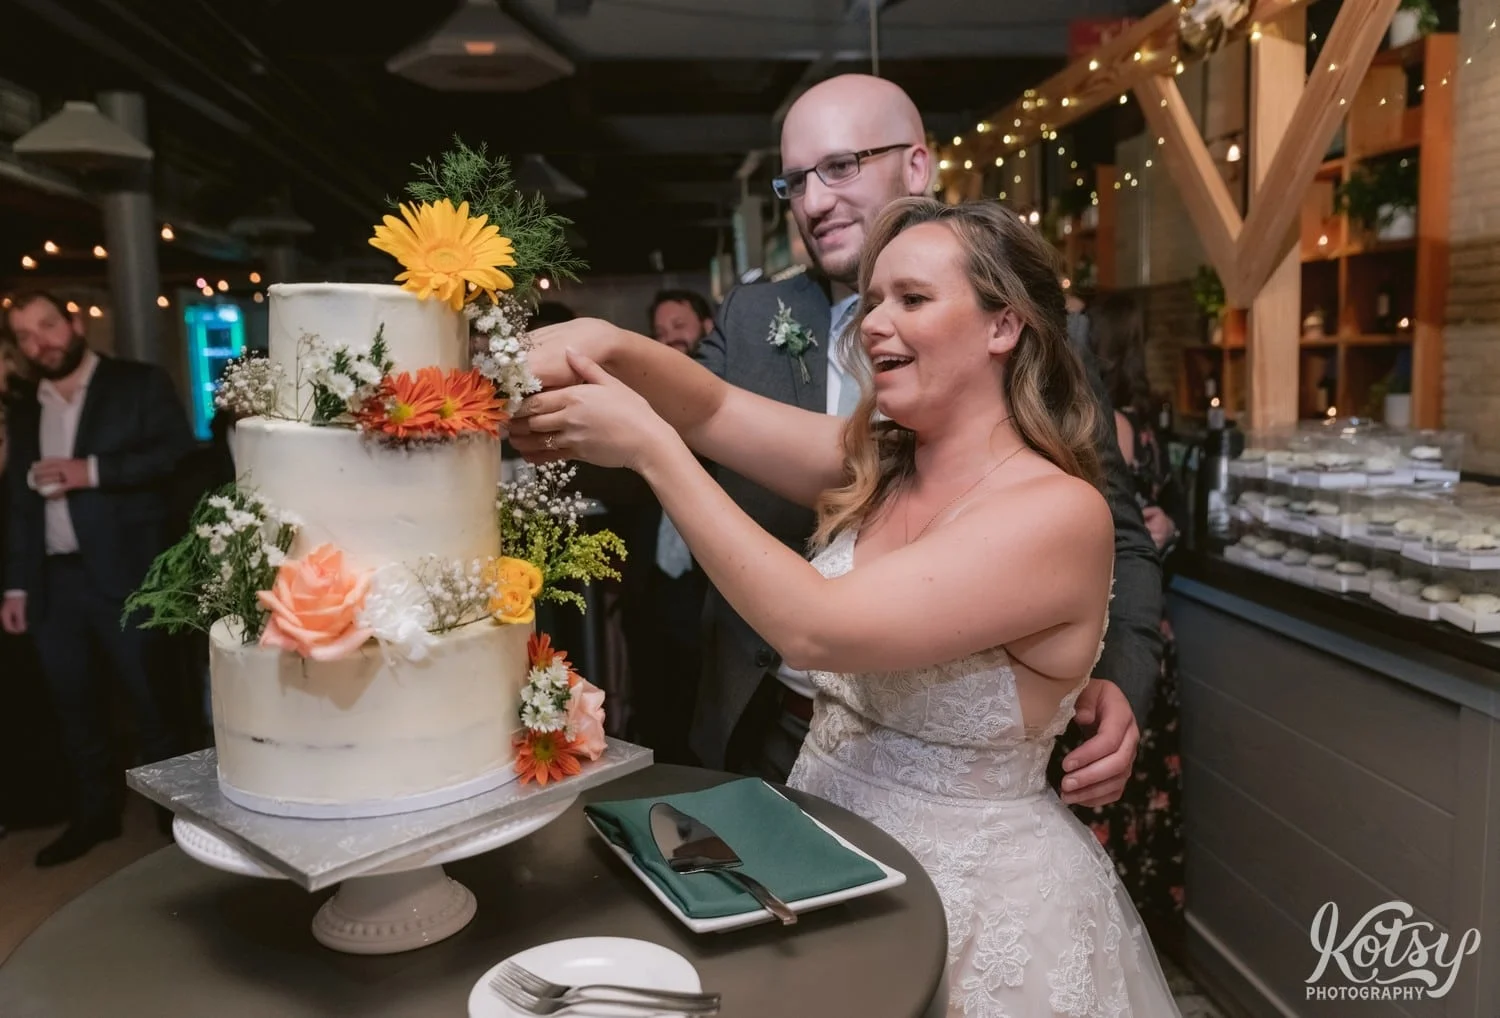 A bride in a white wedding gown and groom in gray suit cut a three tier wedding cake covered in flowers and white icing during their Second Floor Events wedding reception in Toronto, Canada.